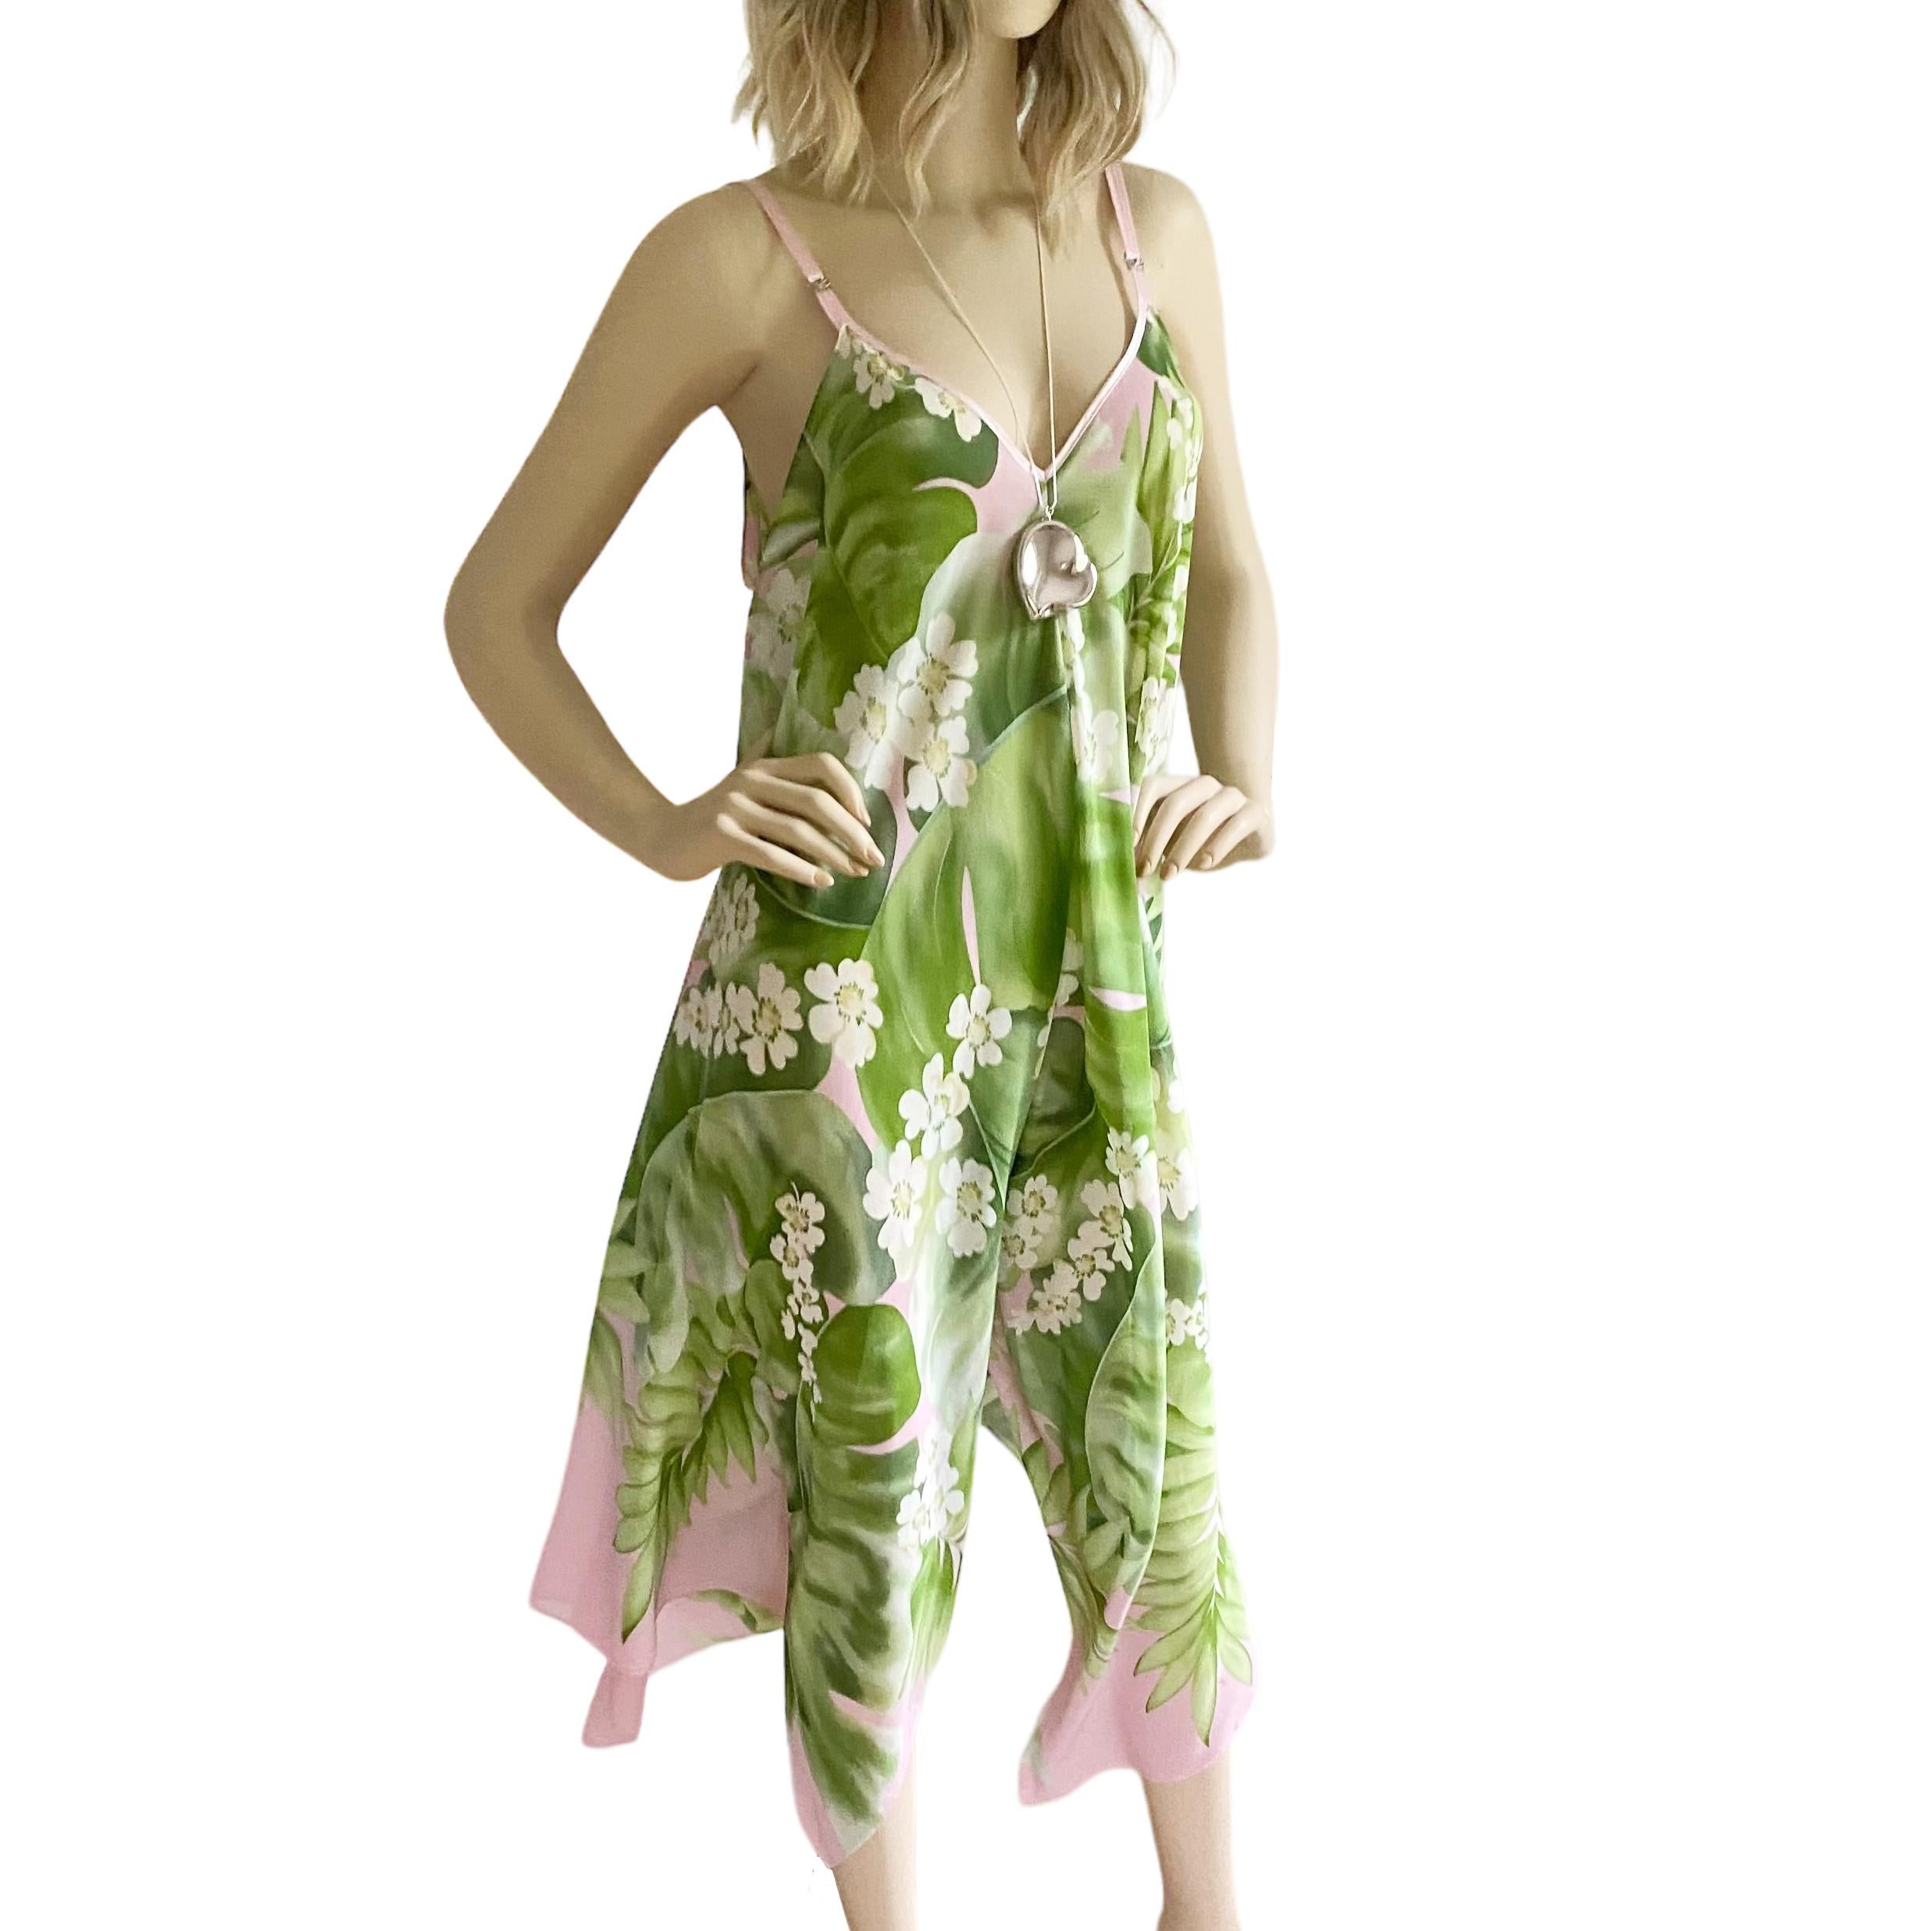 Will you wear it barefoot or with stilettos? 
Lovely colors, lovely print, lovely cut. Very flattering dress with a high cut center (that's hard to see in the photos).

Shoulder straps are adjustable. The straps are funky and seem twisted with